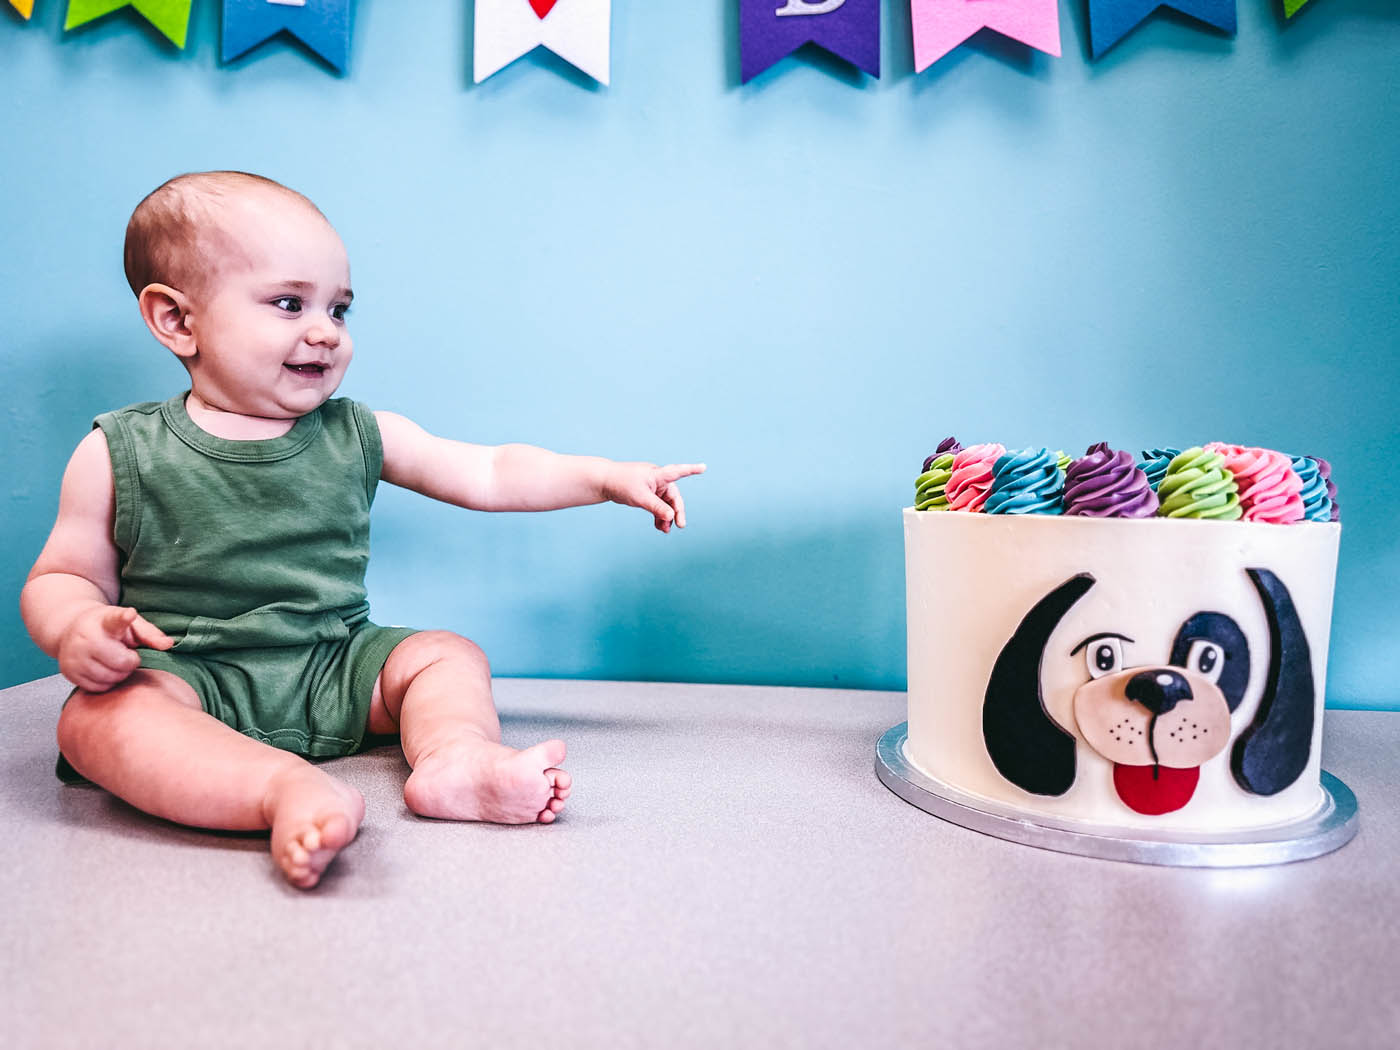 A little baby boy sitting next to a Rompy cake, book a birthday party!